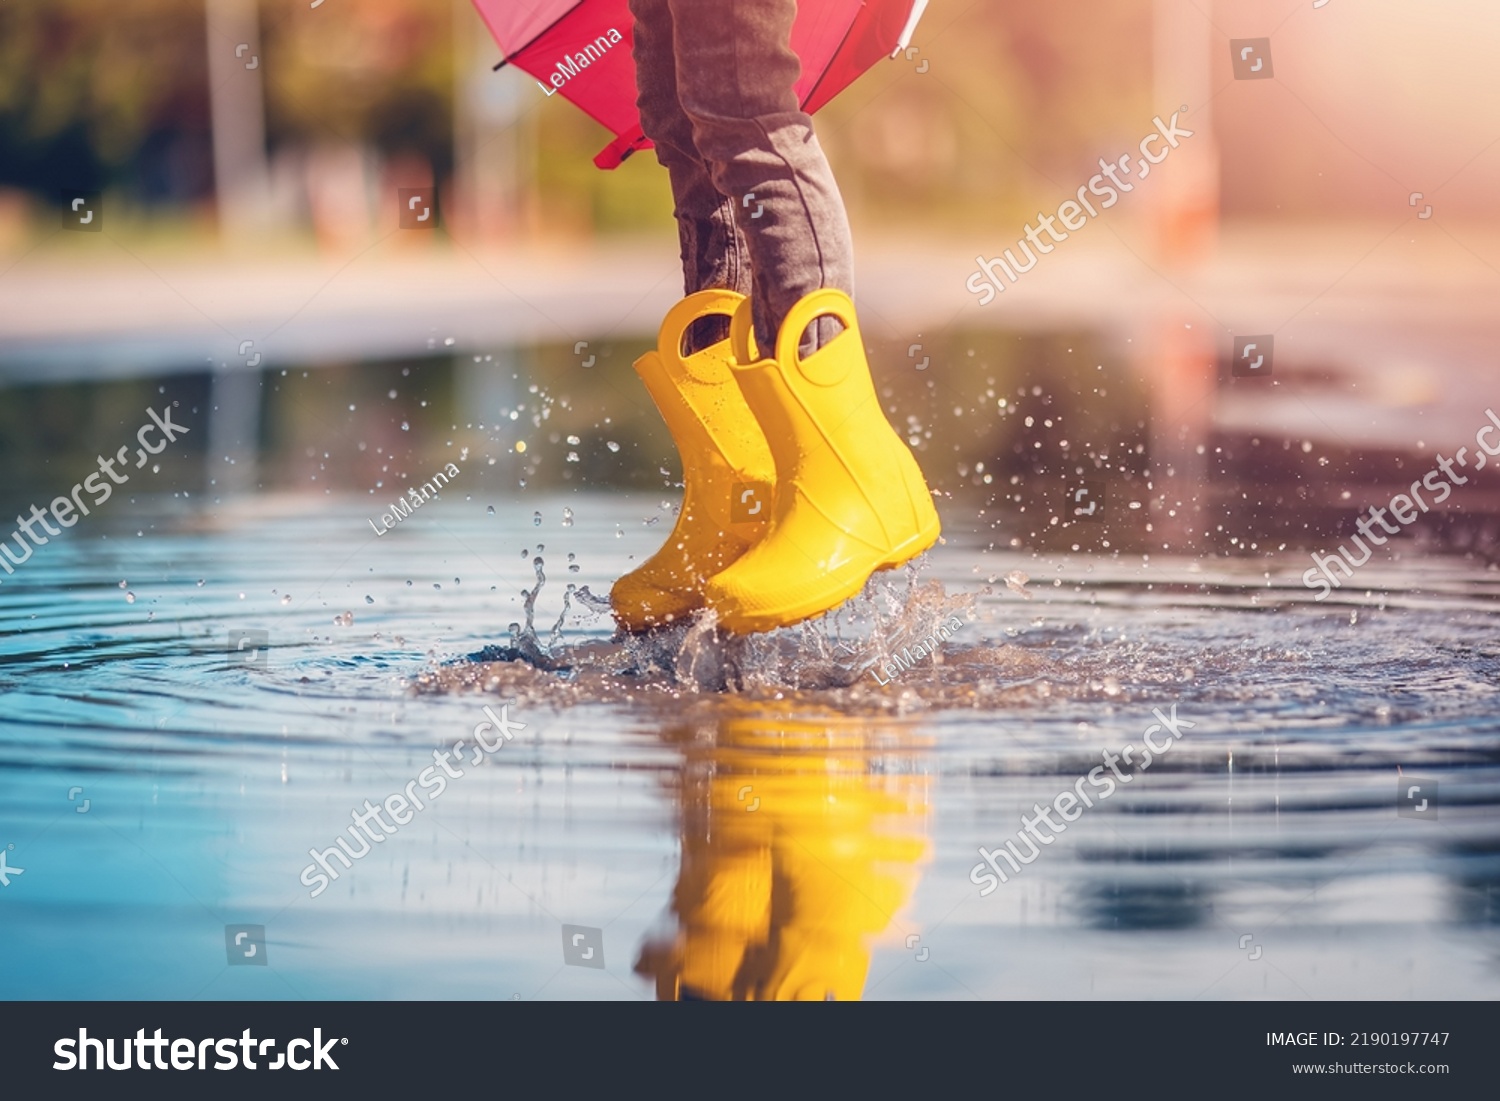 Child jumping in the puddle in yellow rubber boots #2190197747